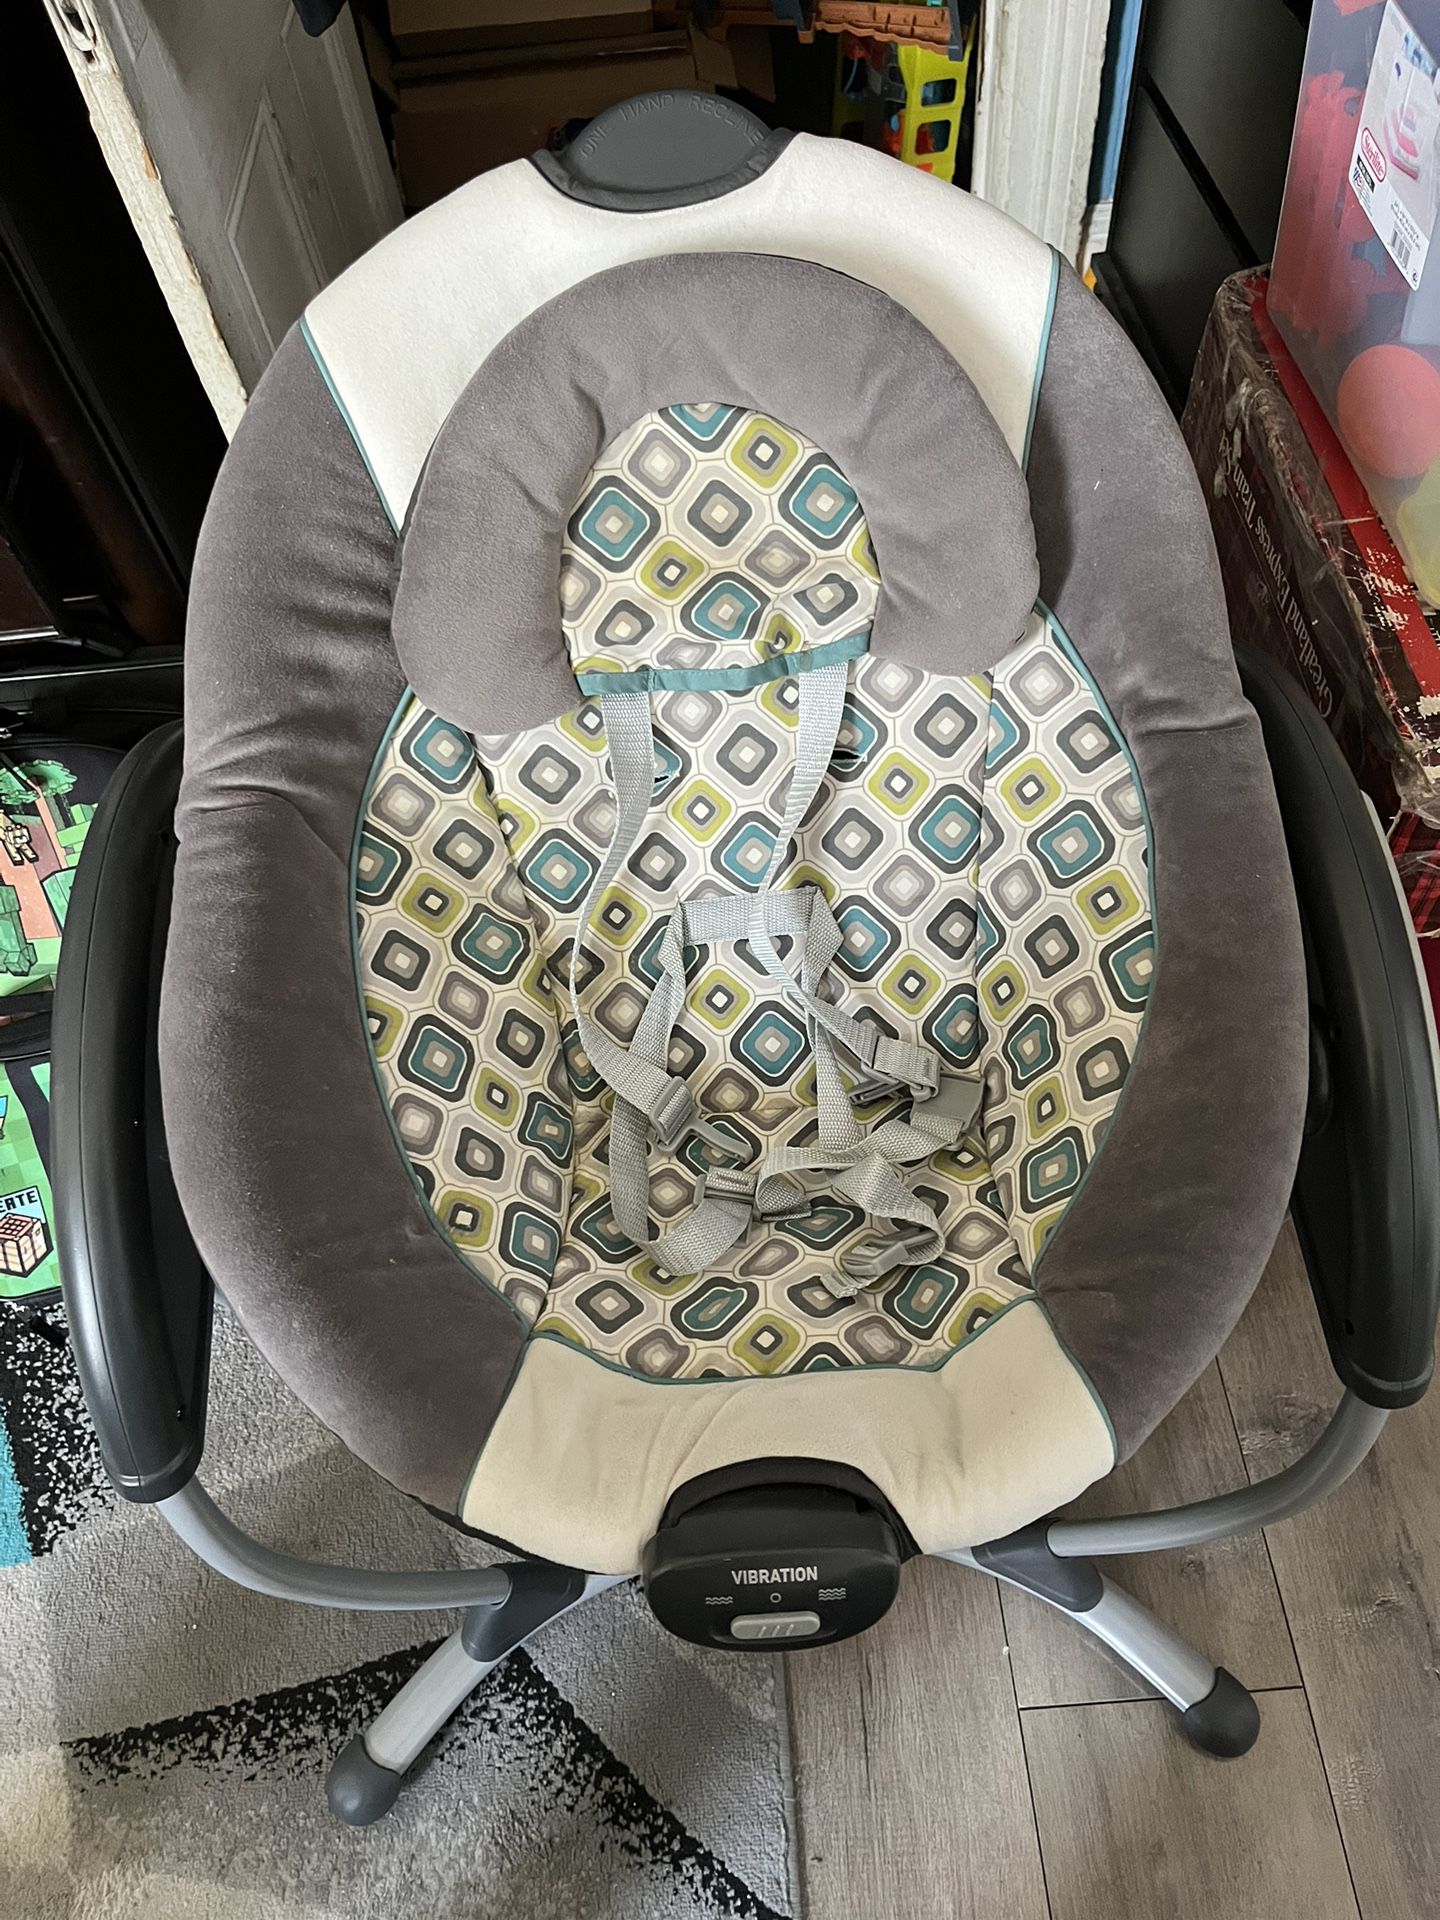  Baby Swing $30(barely Used) Graco Glider Lx Swing